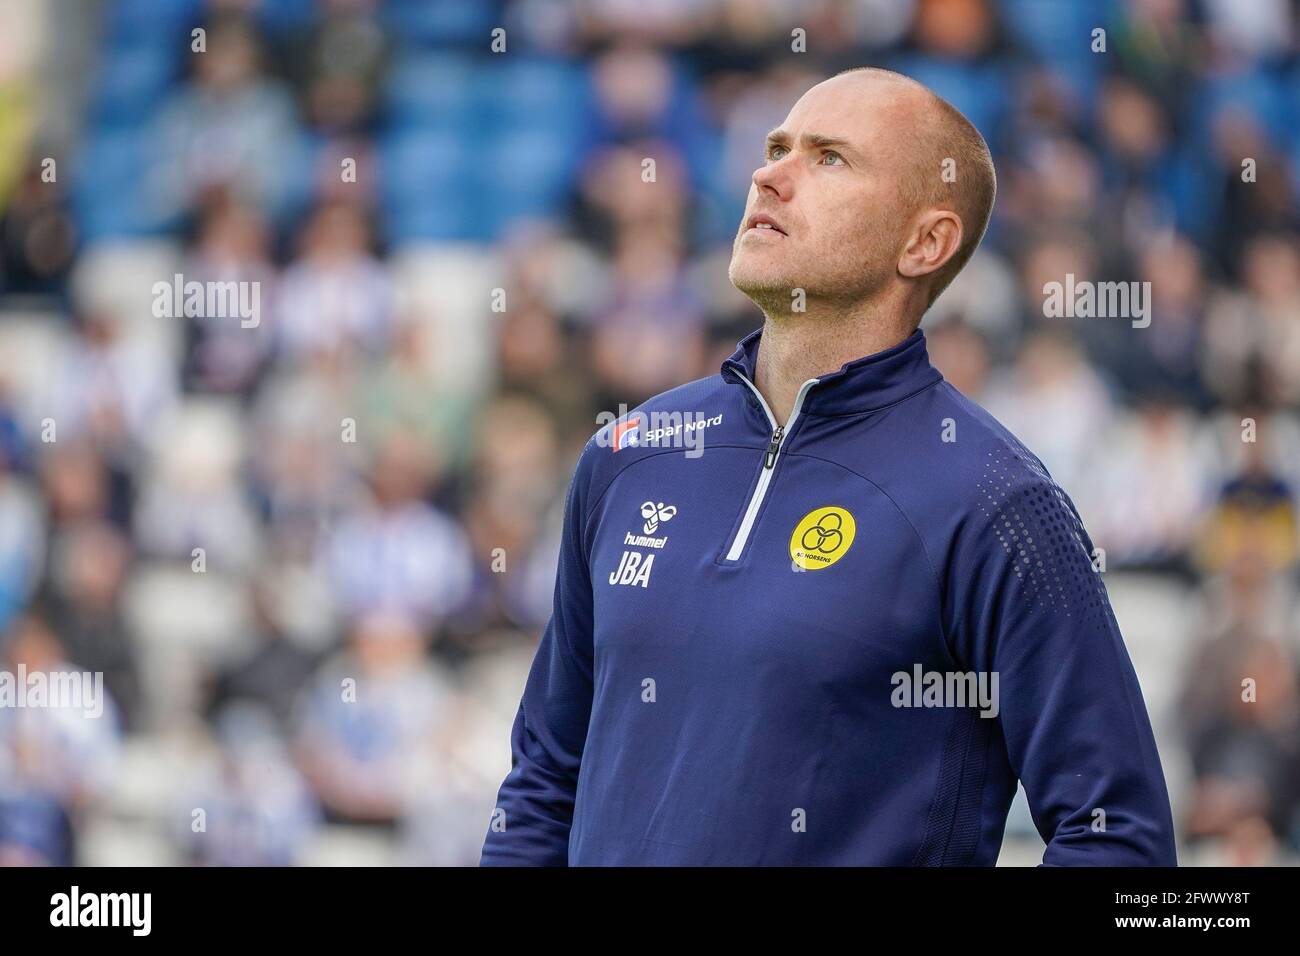 Odense, Denmark. 24th May, 2021. Head coach Jens Berthel Askou of AC Horsens seen during the 3F Superliga match Odense Boldklub AC at Nature Energy Park in Odense. (Photo